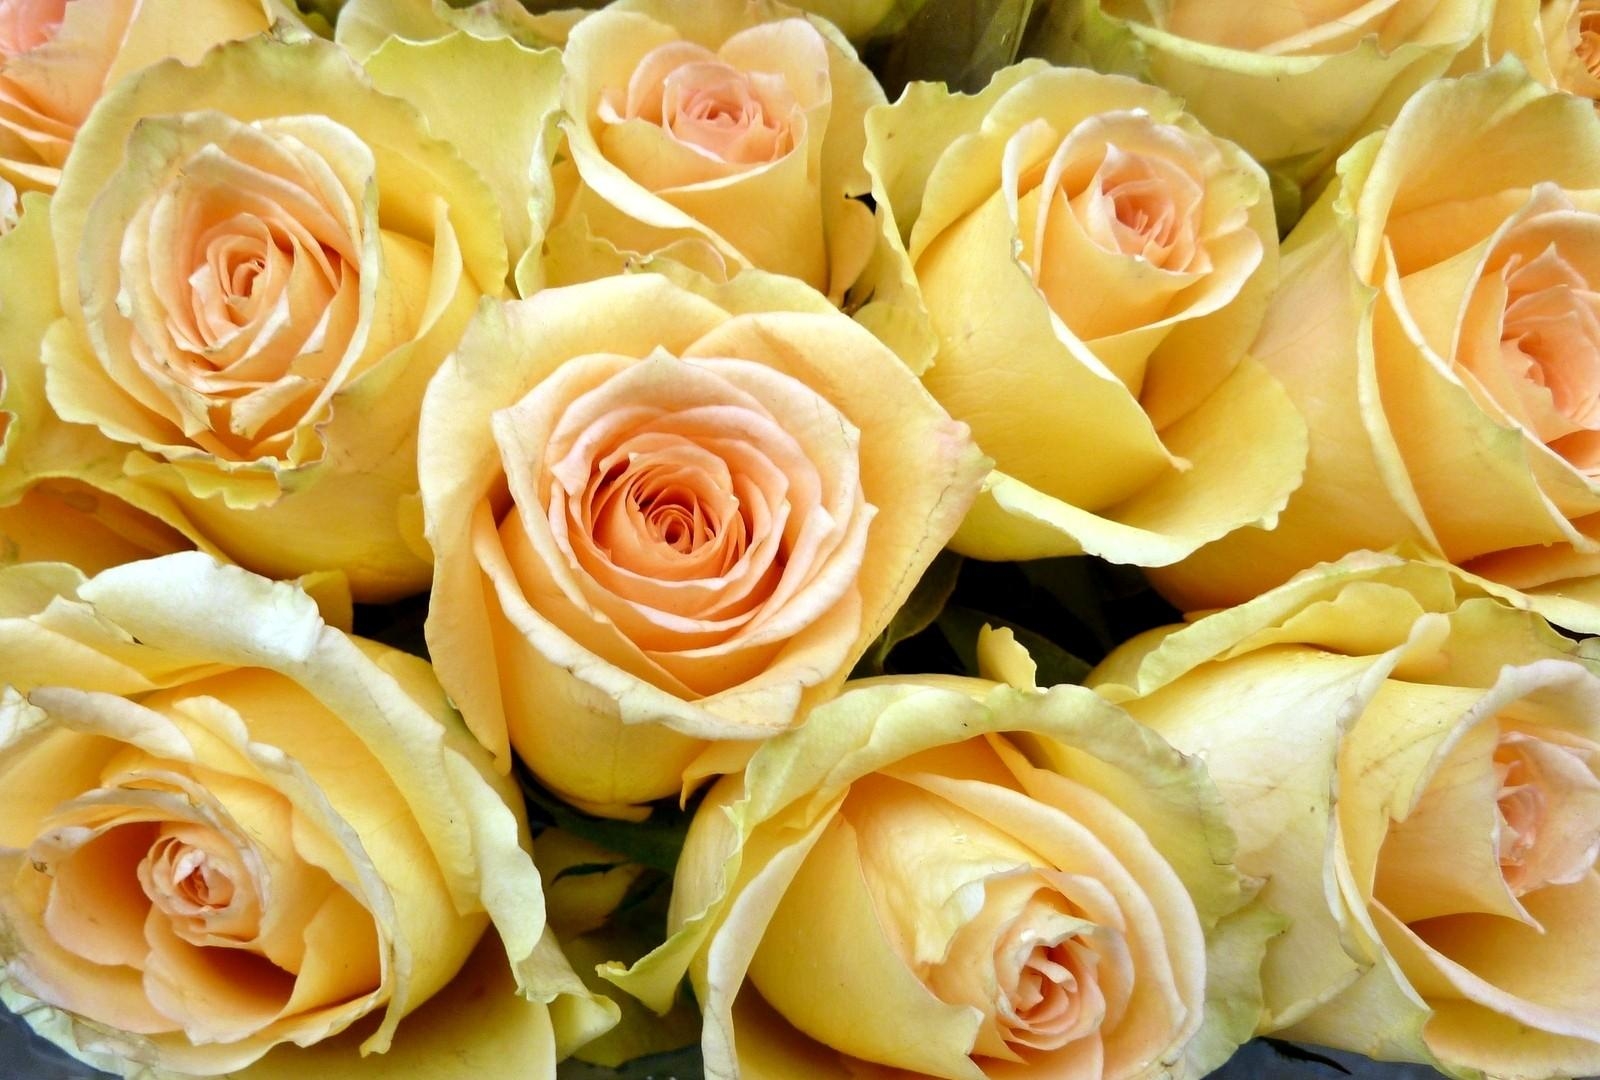 flowers, roses, yellow, buds, lot